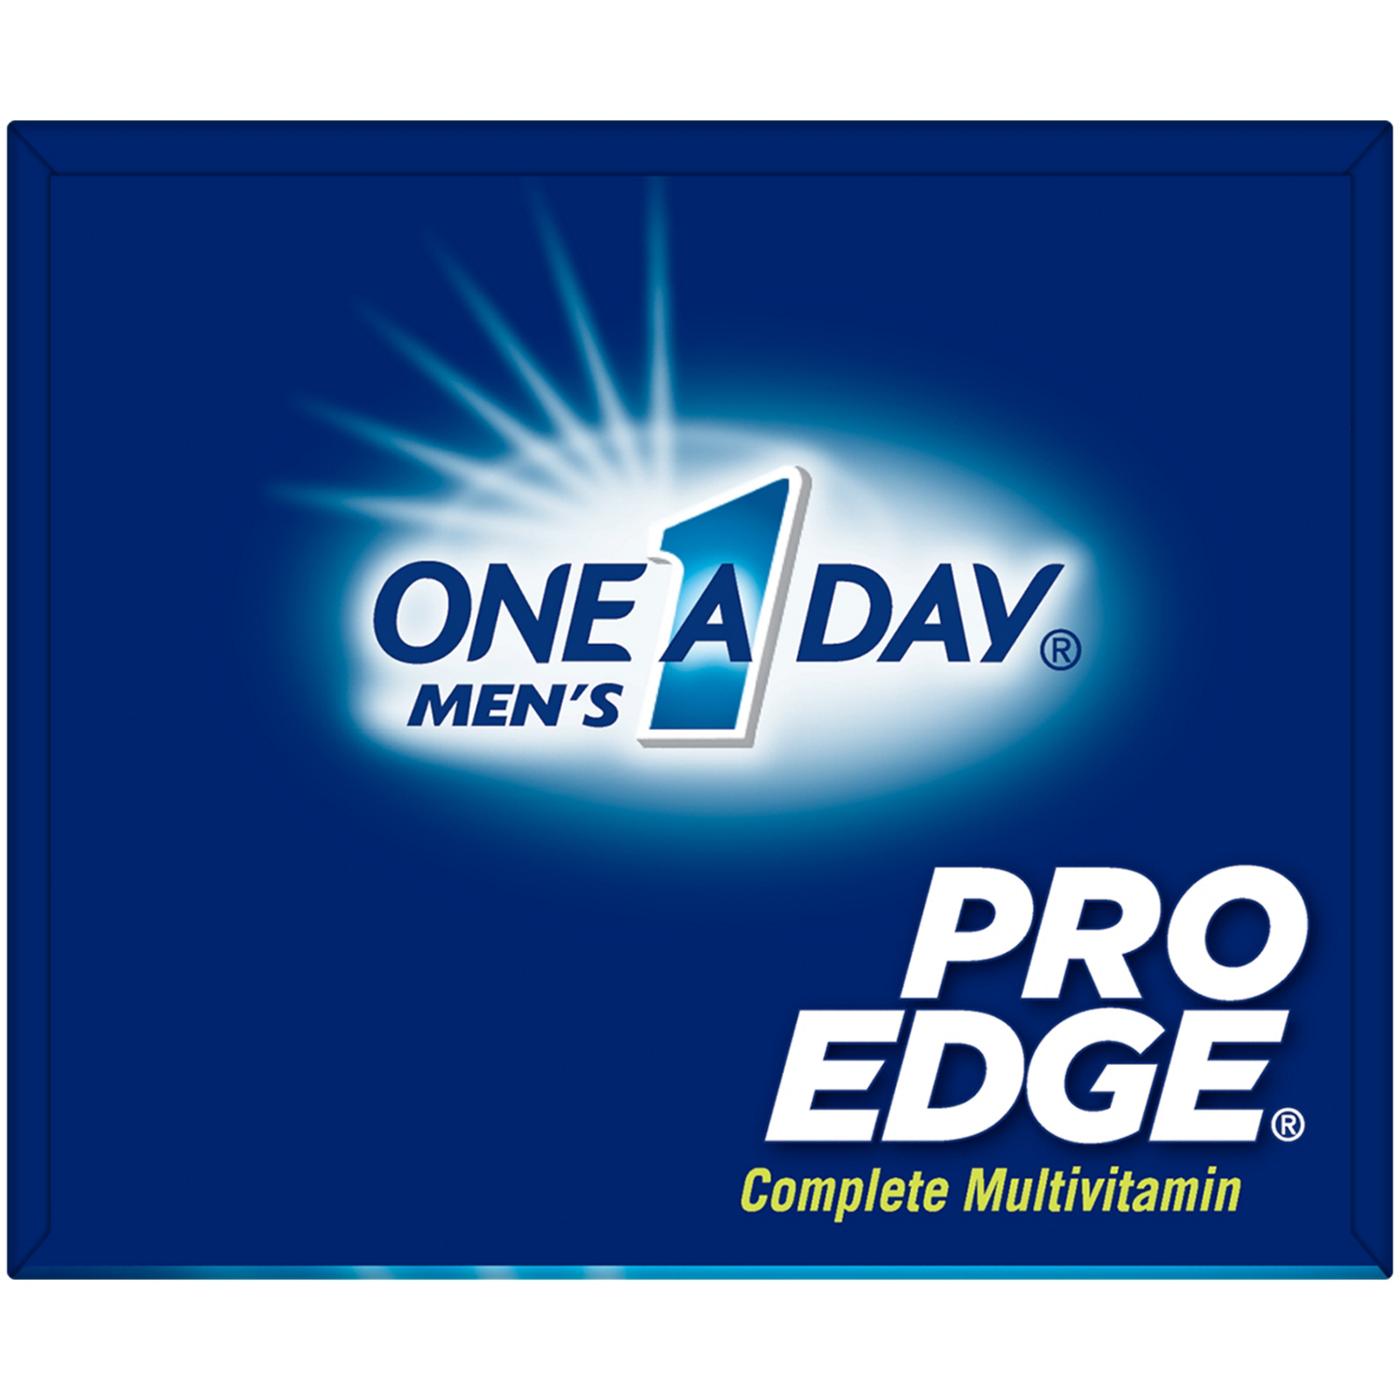 One A Day Men's Pro Edge Multivitamin Tablets; image 5 of 8